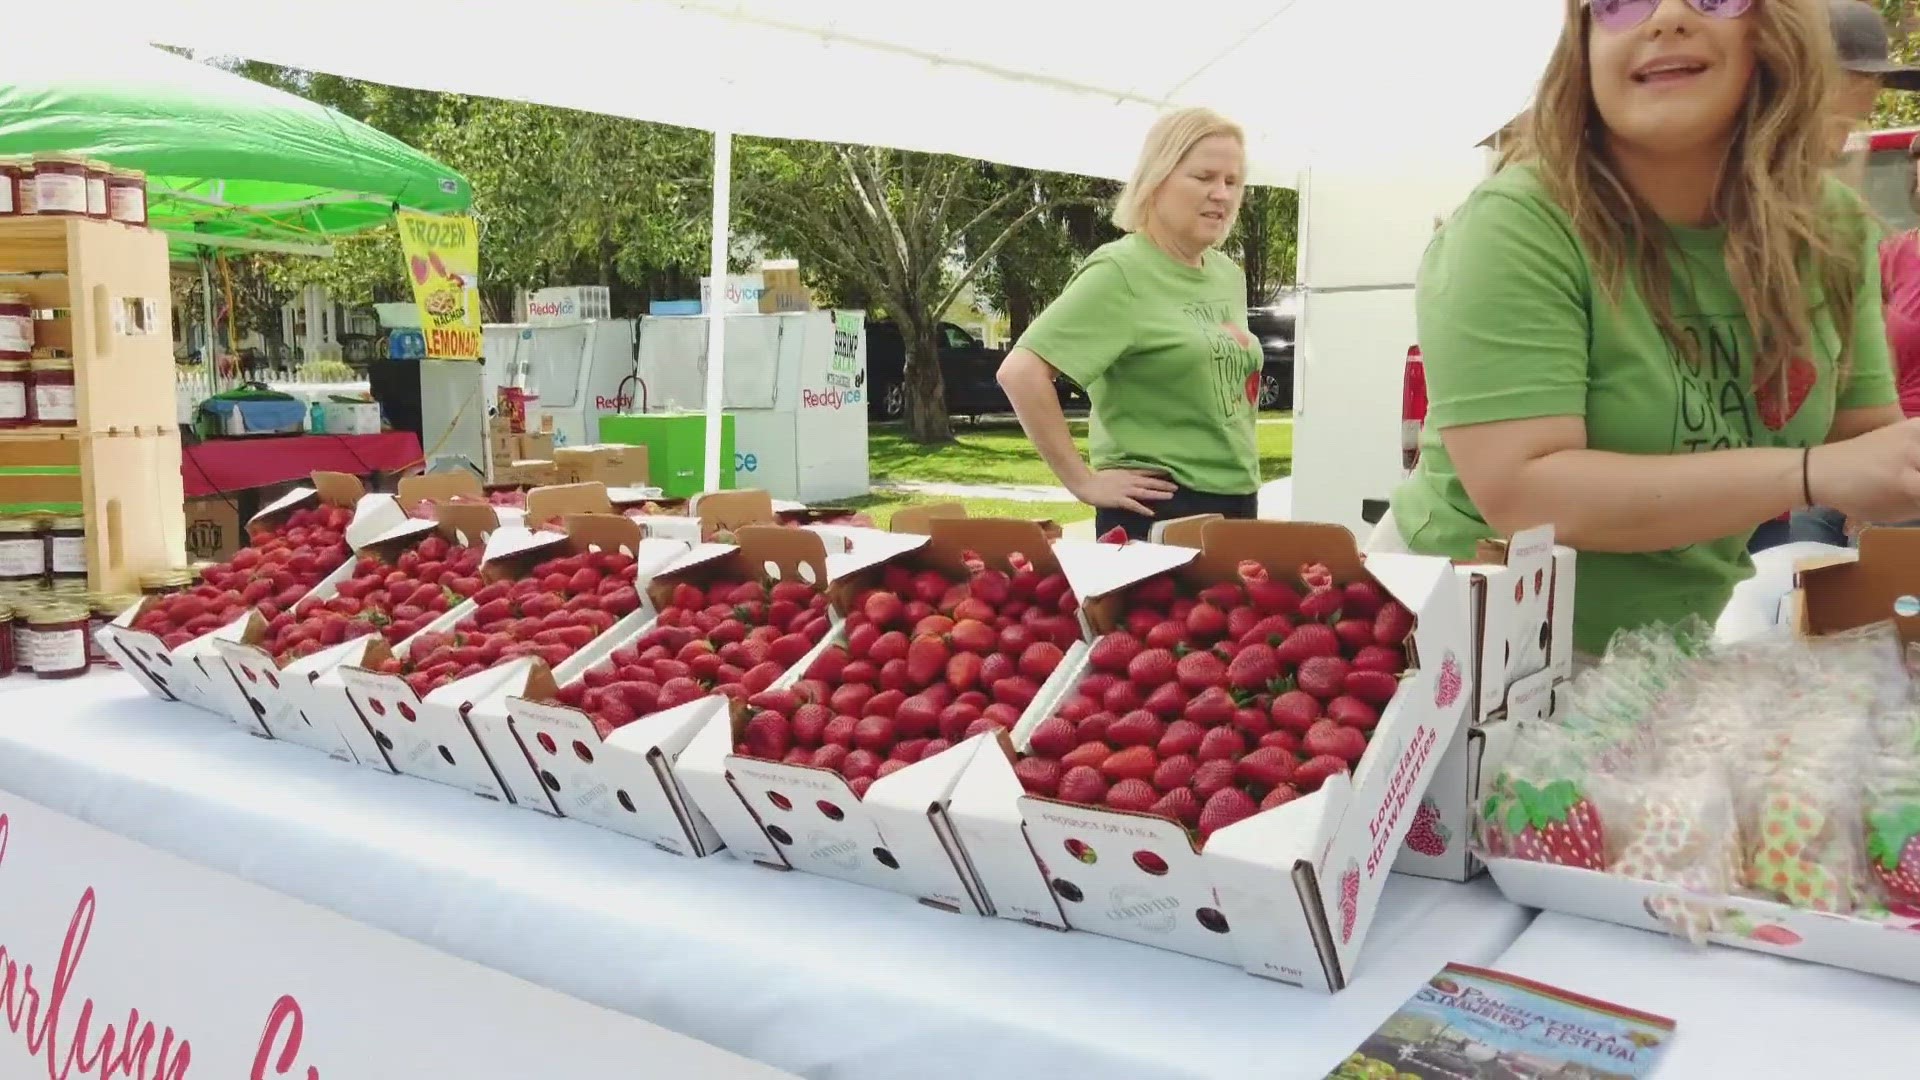 Ponchatoula Strawberry Festival is a three-day festival starting on Friday, April 12, and ending on Sunday, April 14.